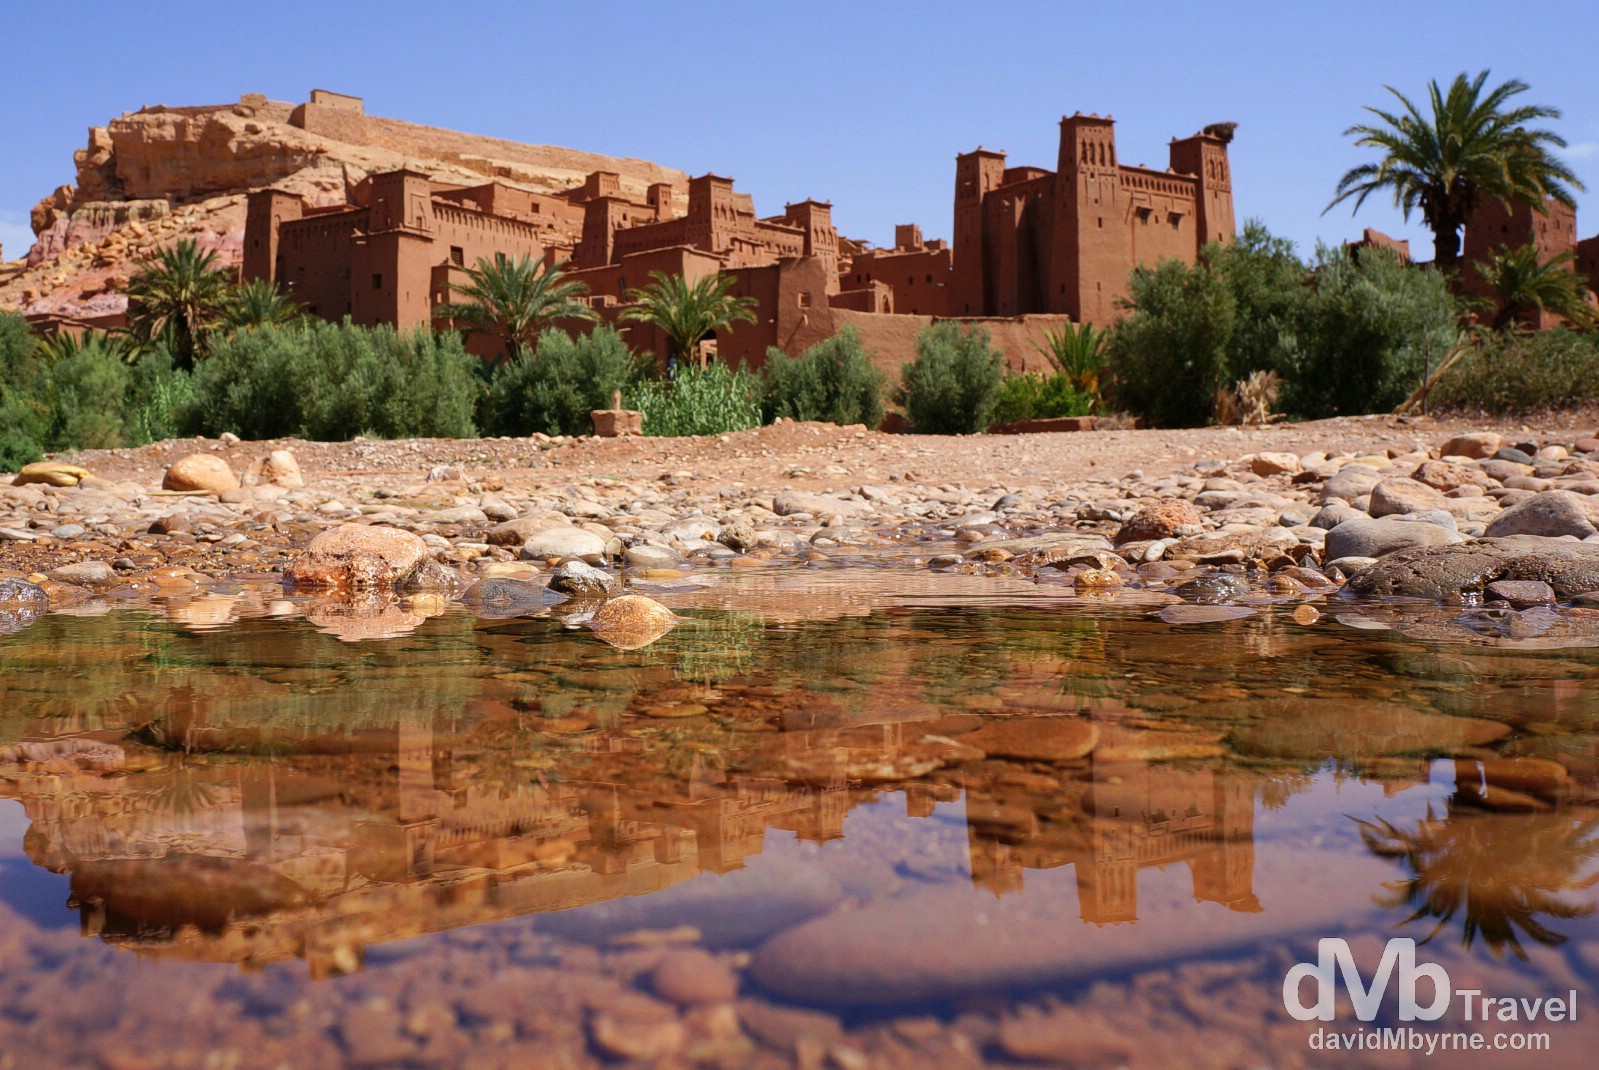 UNESCO-listed Ait Benhaddou in southern Morocco. May 14th, 2014.